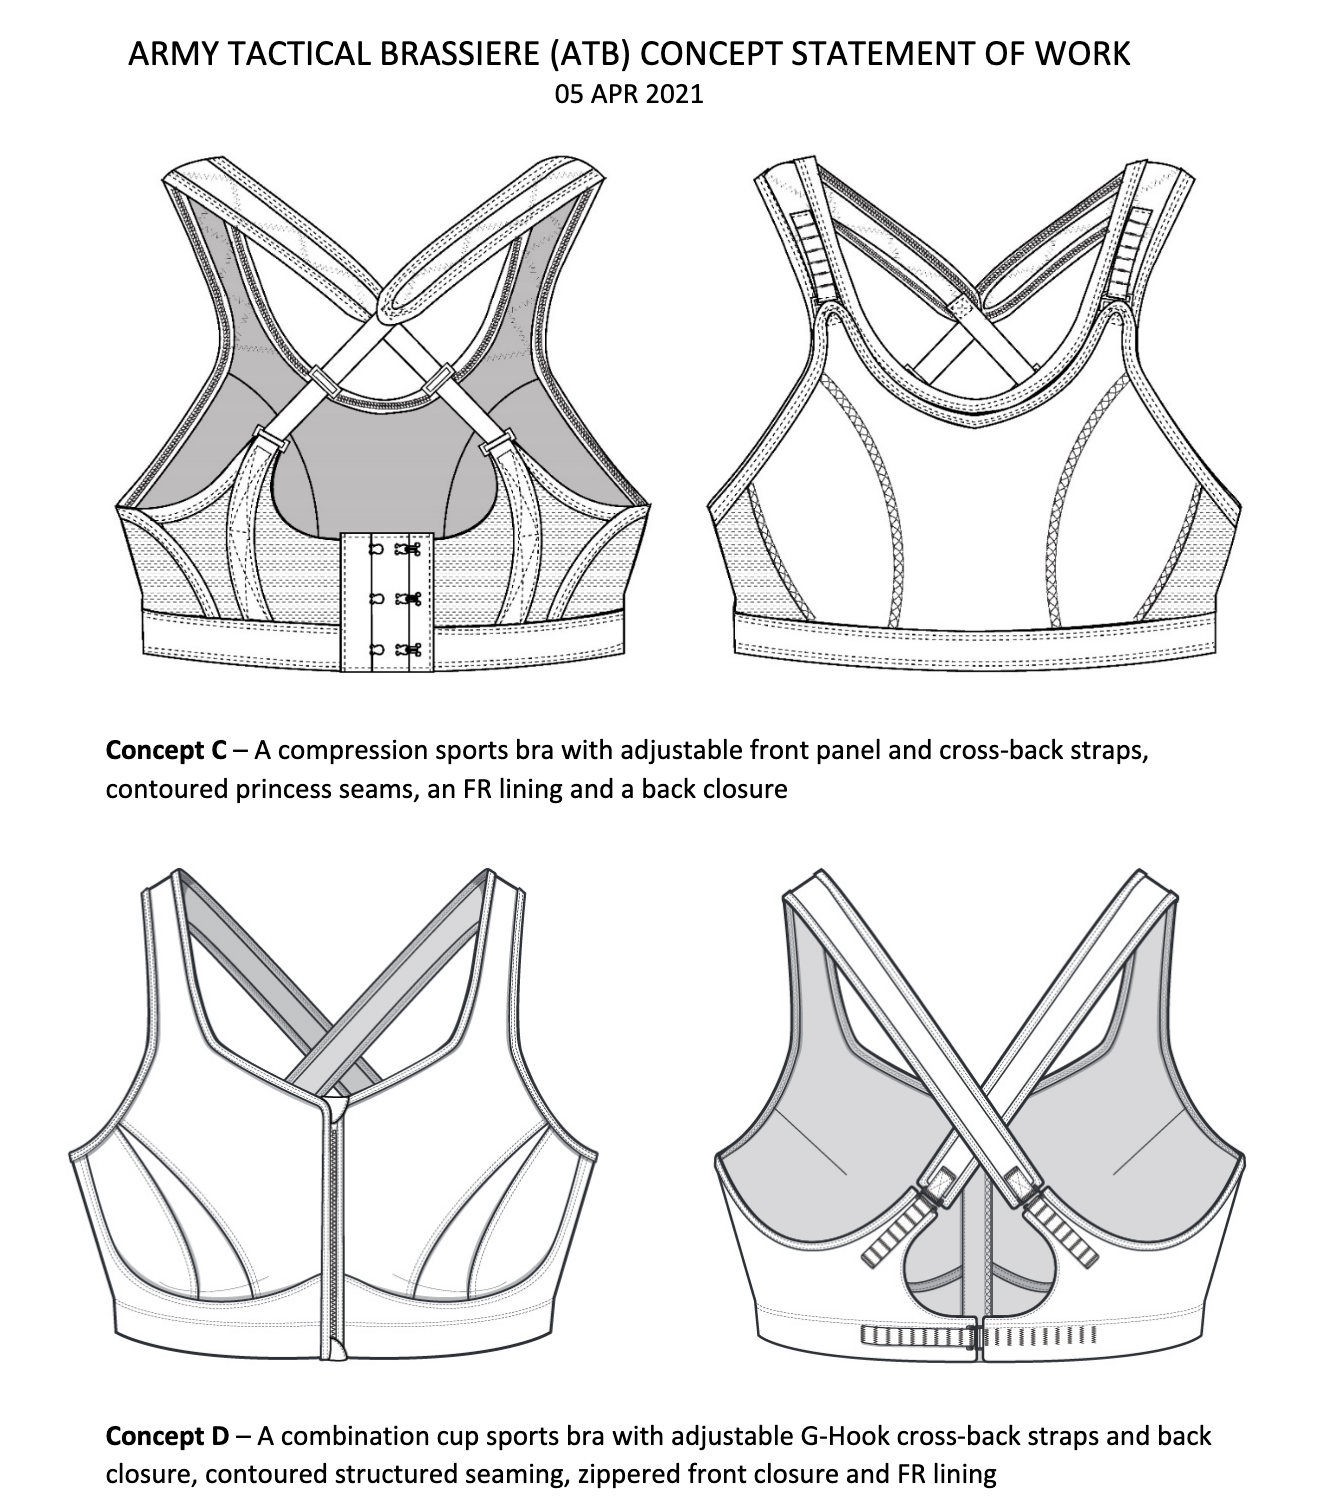 What goes into making a brassiere for warfighters? – Fashion